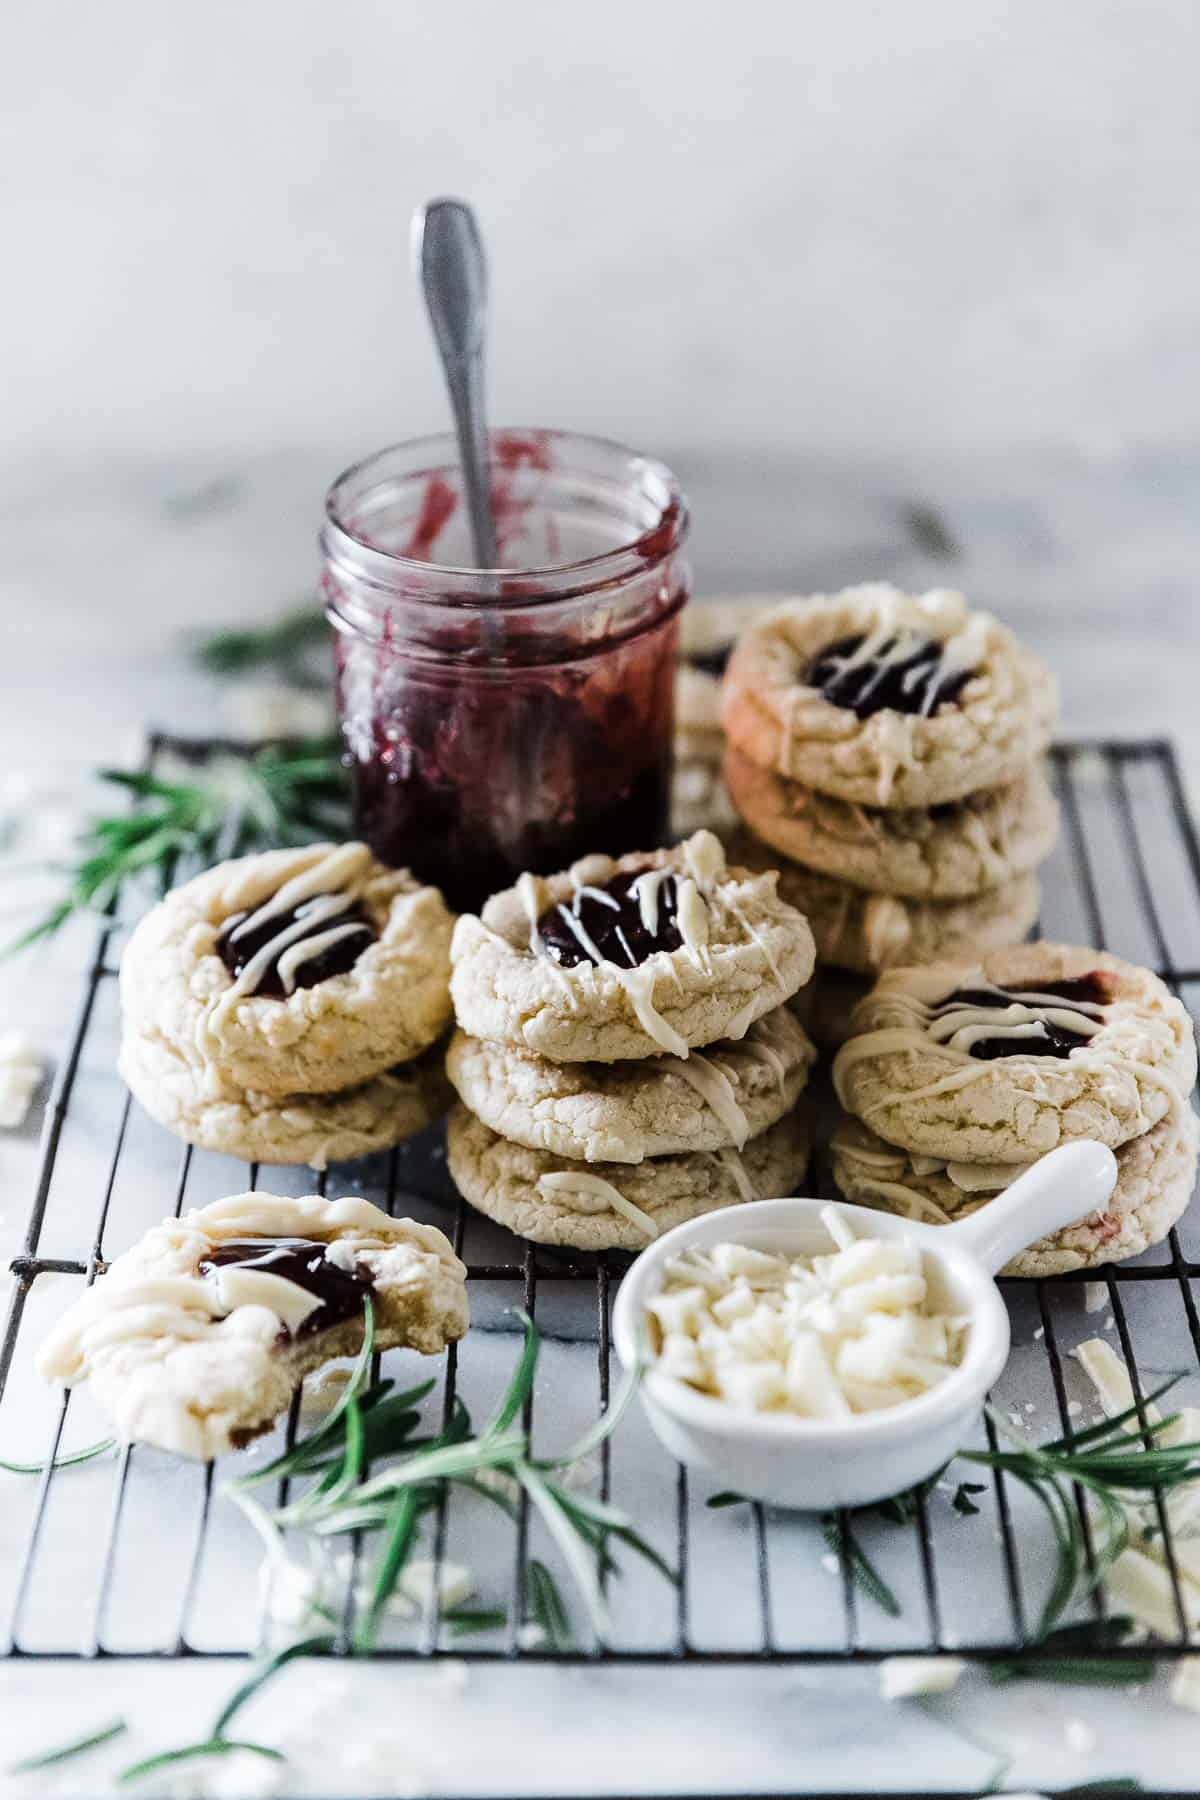 White chocolate raspberry cookies on a cooling rack next to a jar of jam.